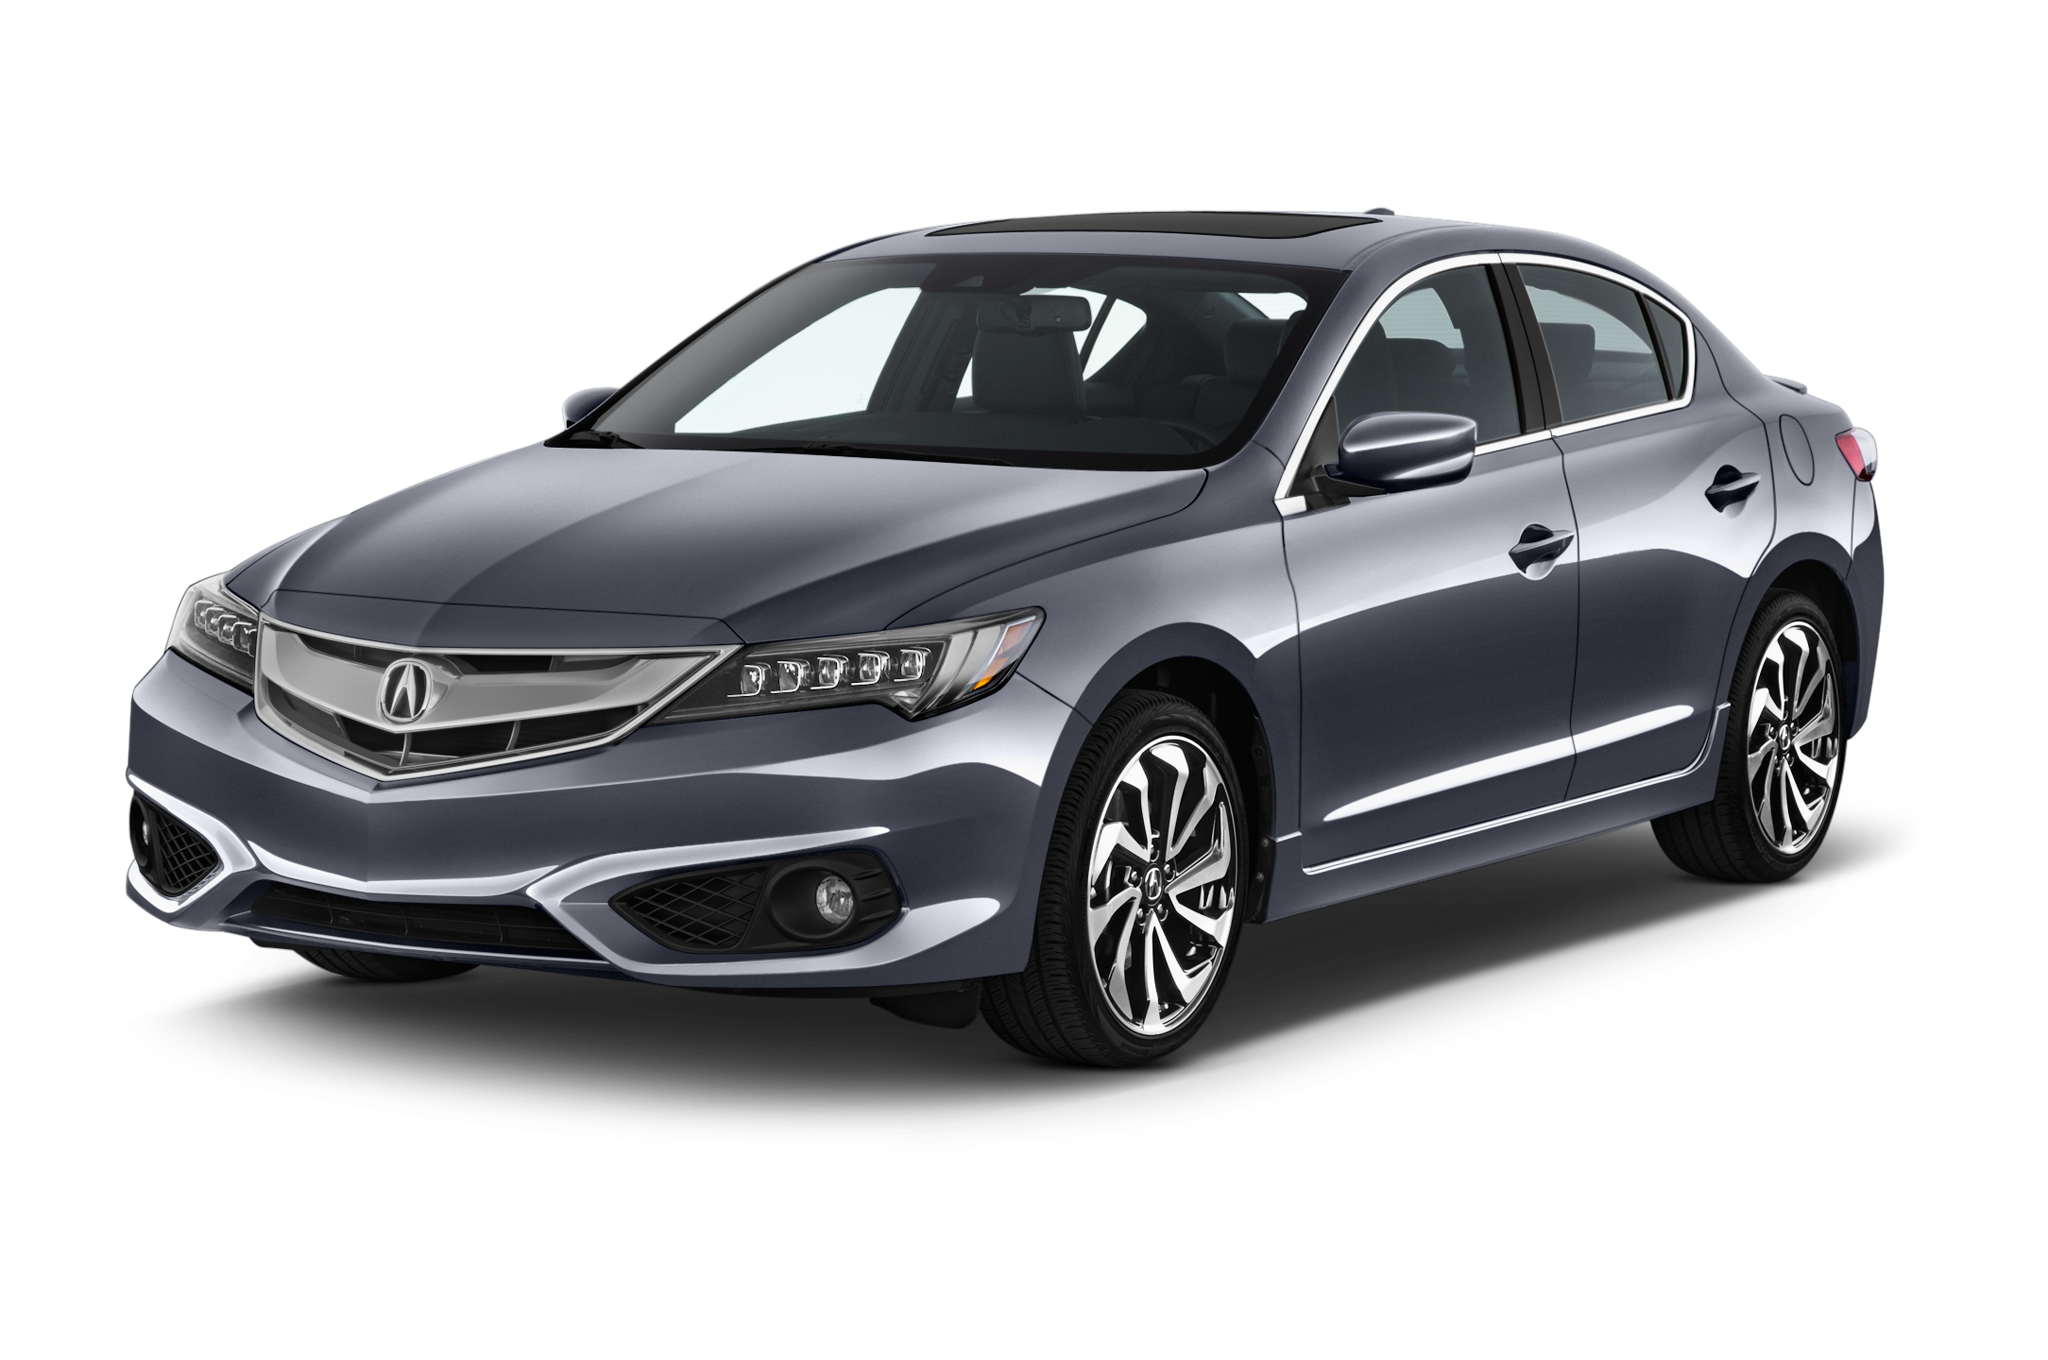 Acura ILX HD wallpapers, Desktop wallpaper - most viewed